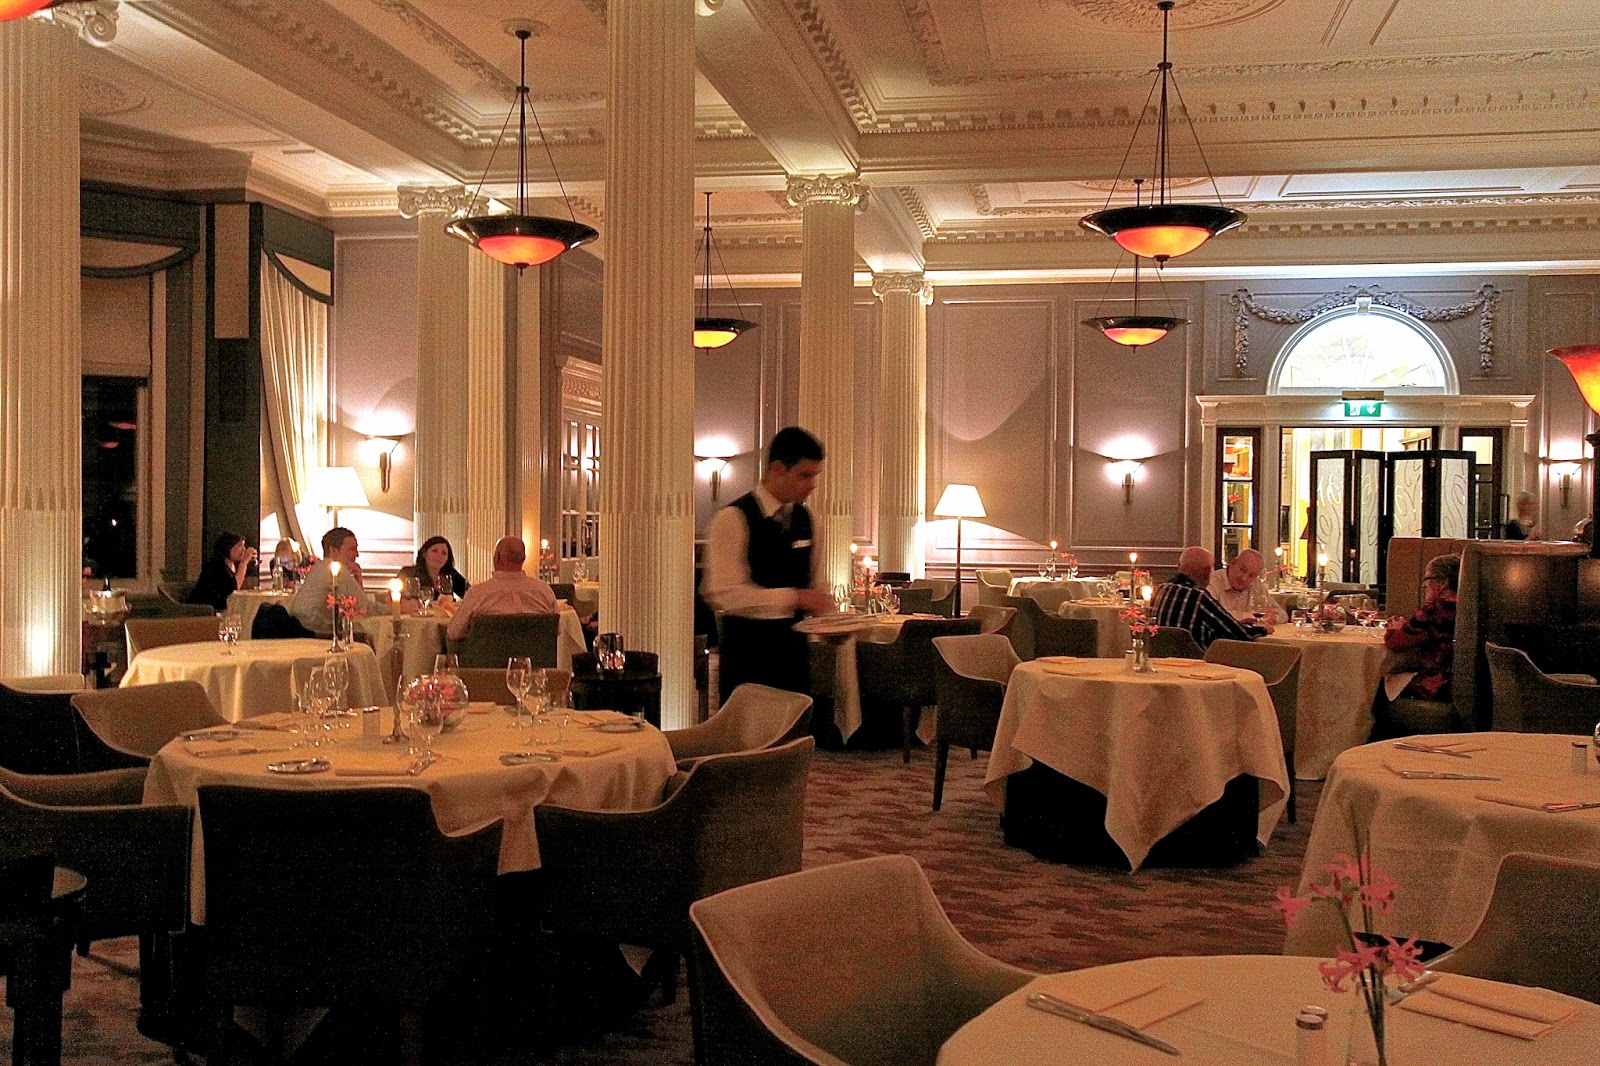 The London Foodie: A Taste of Scottish Hospitality at Gleneagles